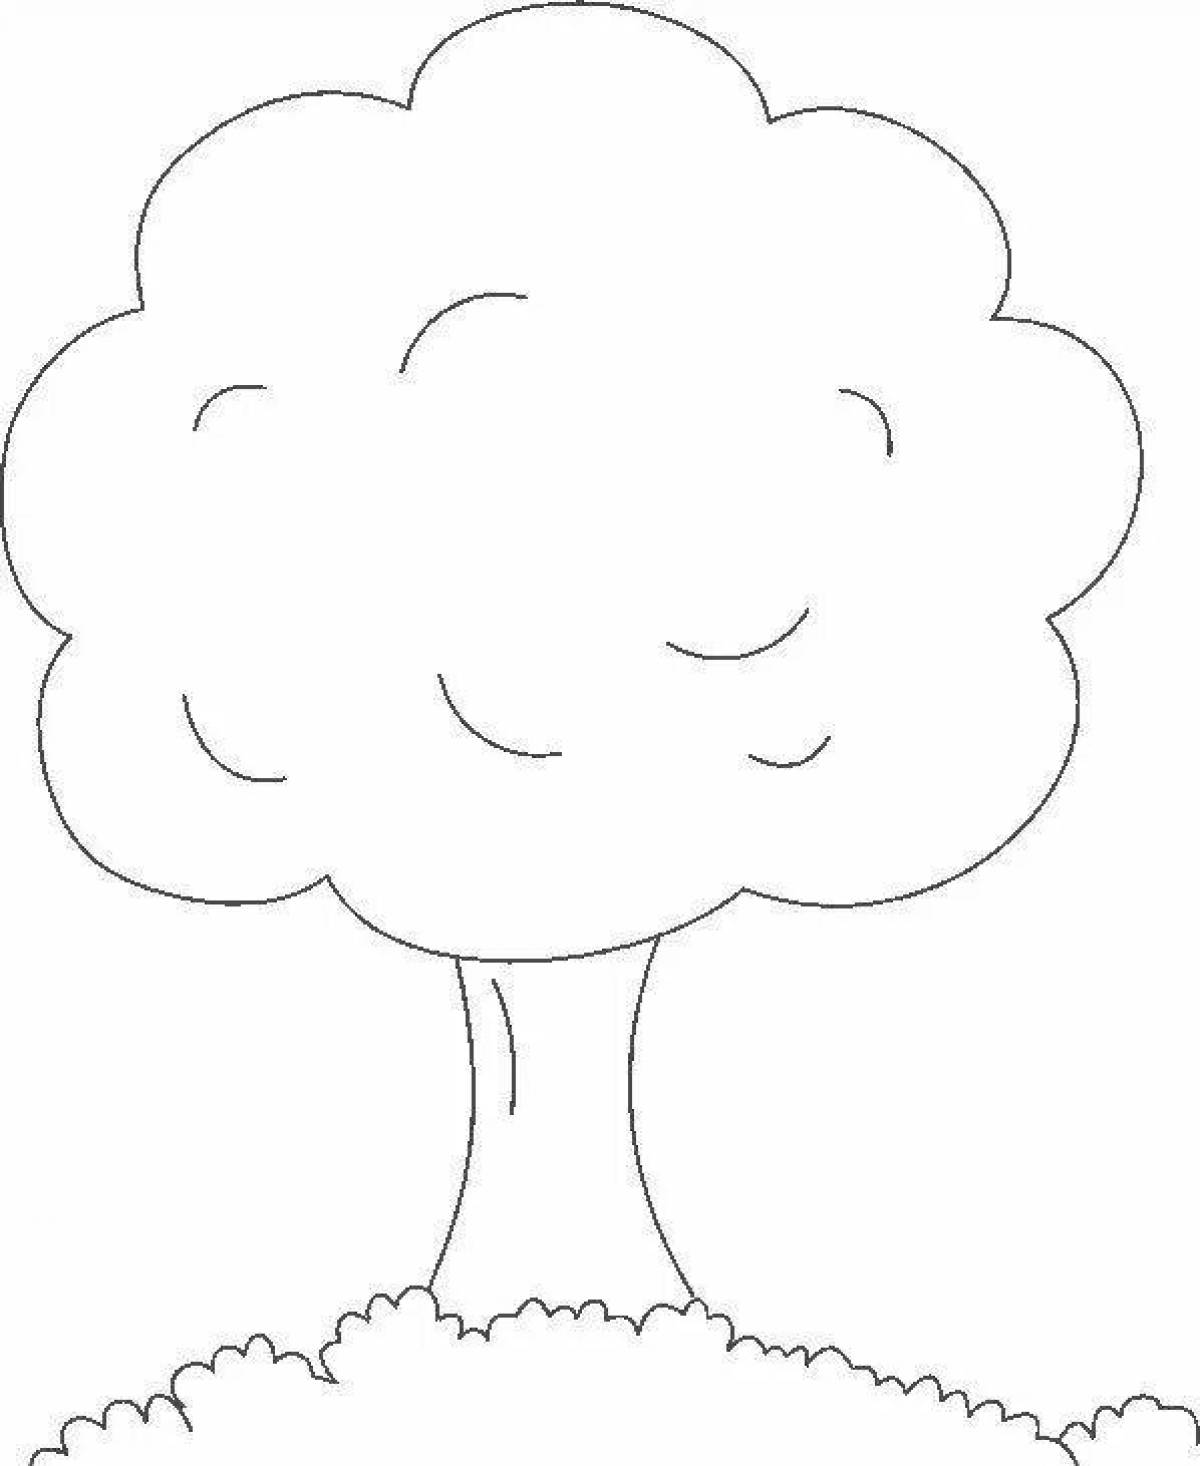 Majestic patterned tree coloring page